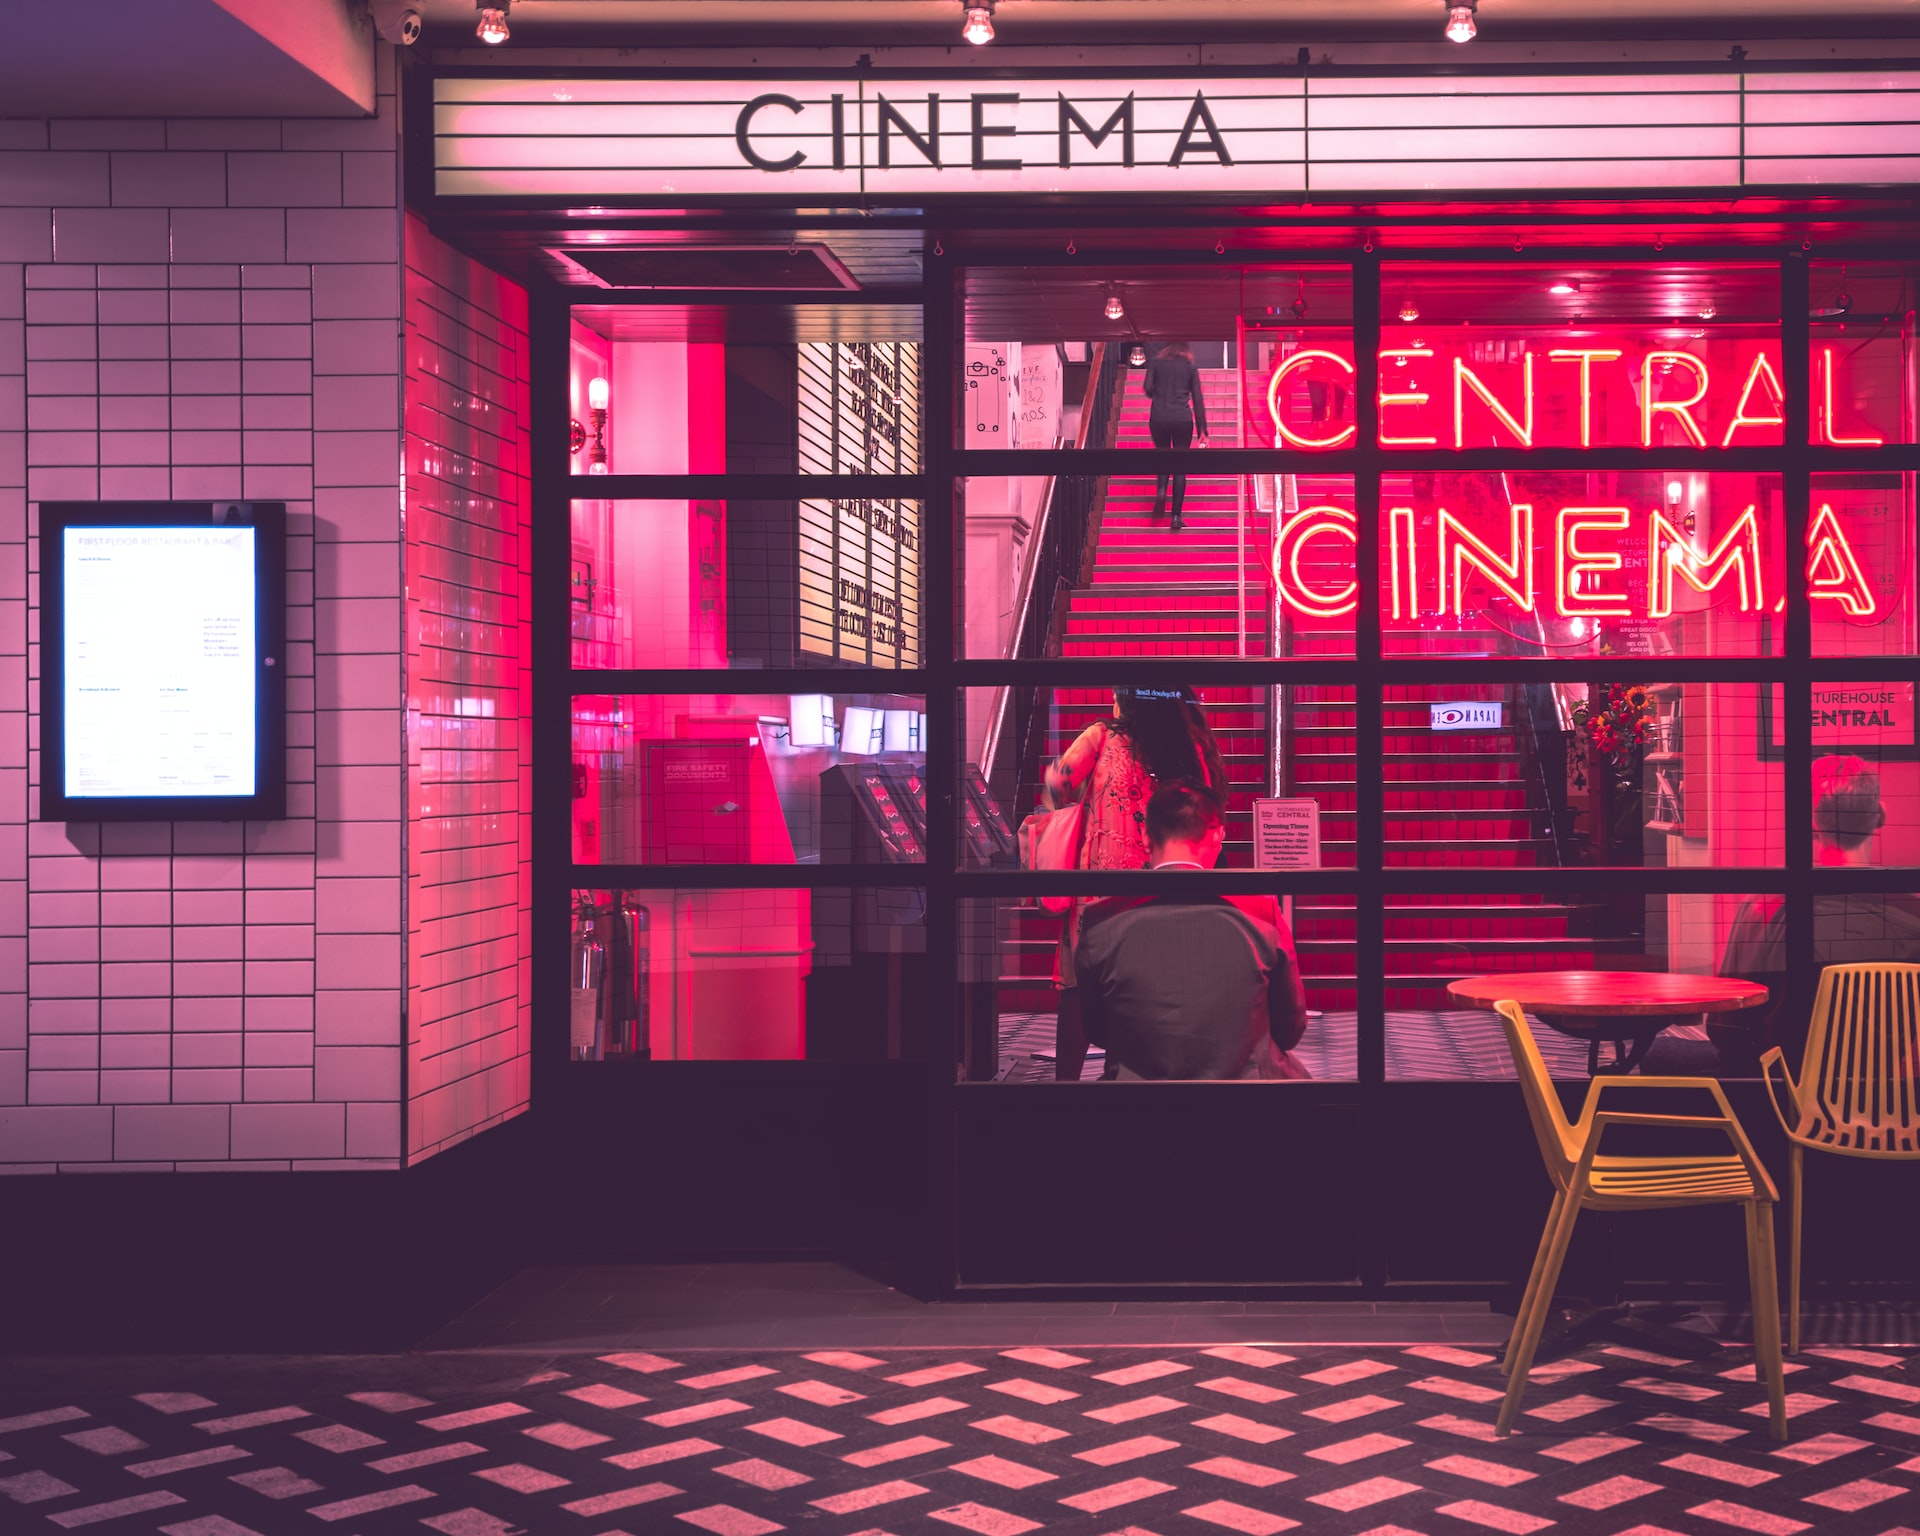 View of the entrance of a cinema